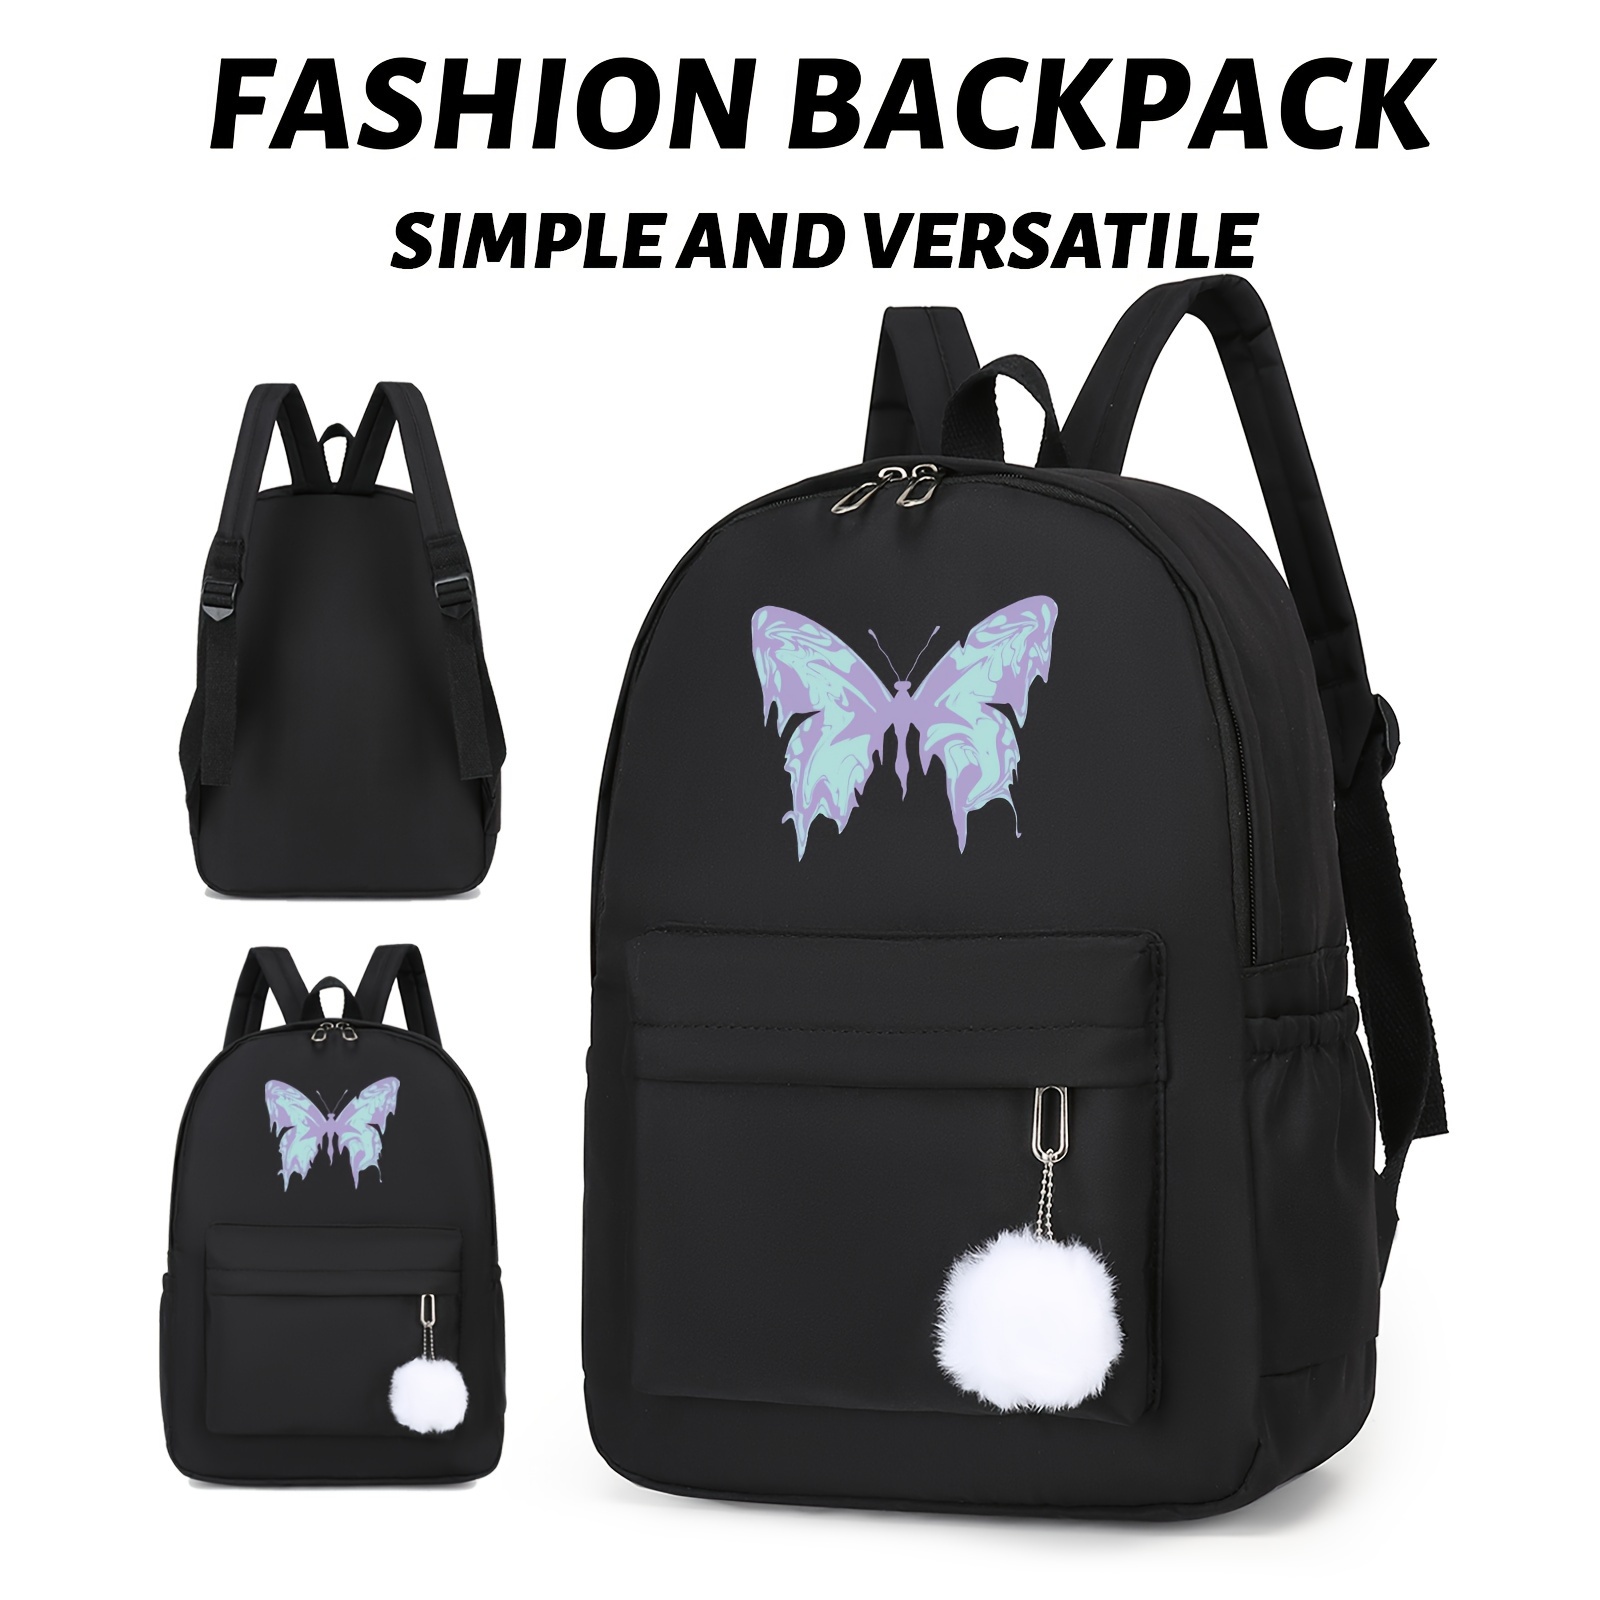 

Stylish And Versatile Backpack With Simple Design, Featuring Cartoon Blue Butterfly Pattern, Suitable For Travel With Its Large Capacity, Multi Functional Backpack